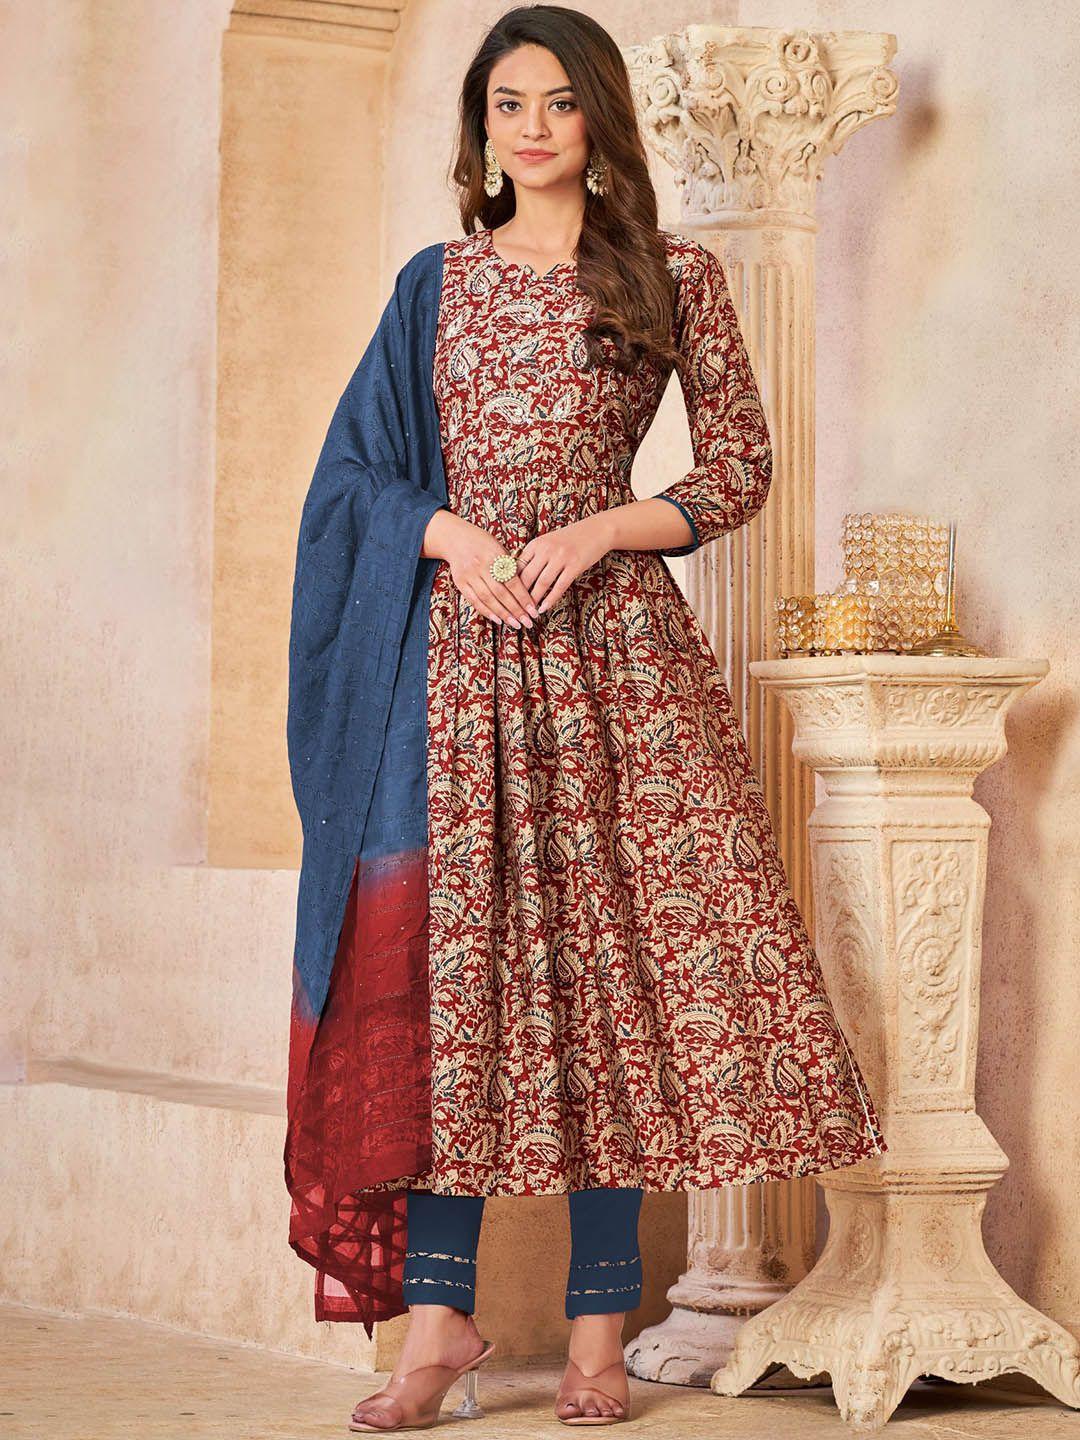 premroop- the style you love paisley printed cotton anarkali kurta with trousers & dupatta